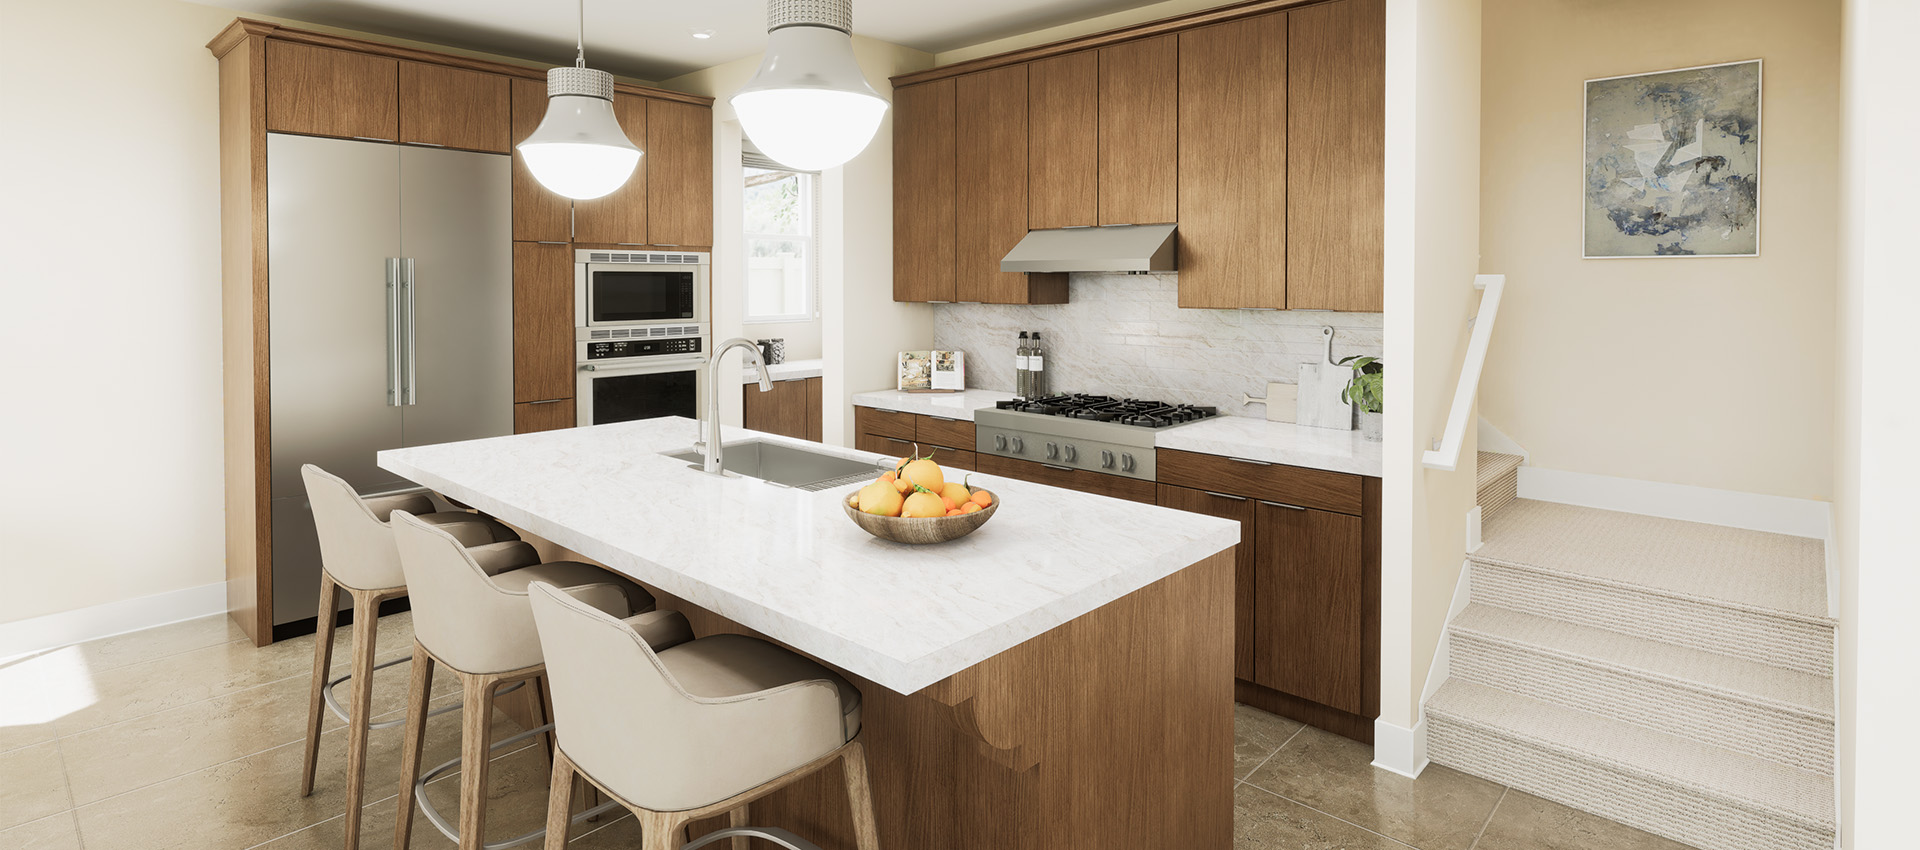 Image of a plan 3 kitchen at 26Tides